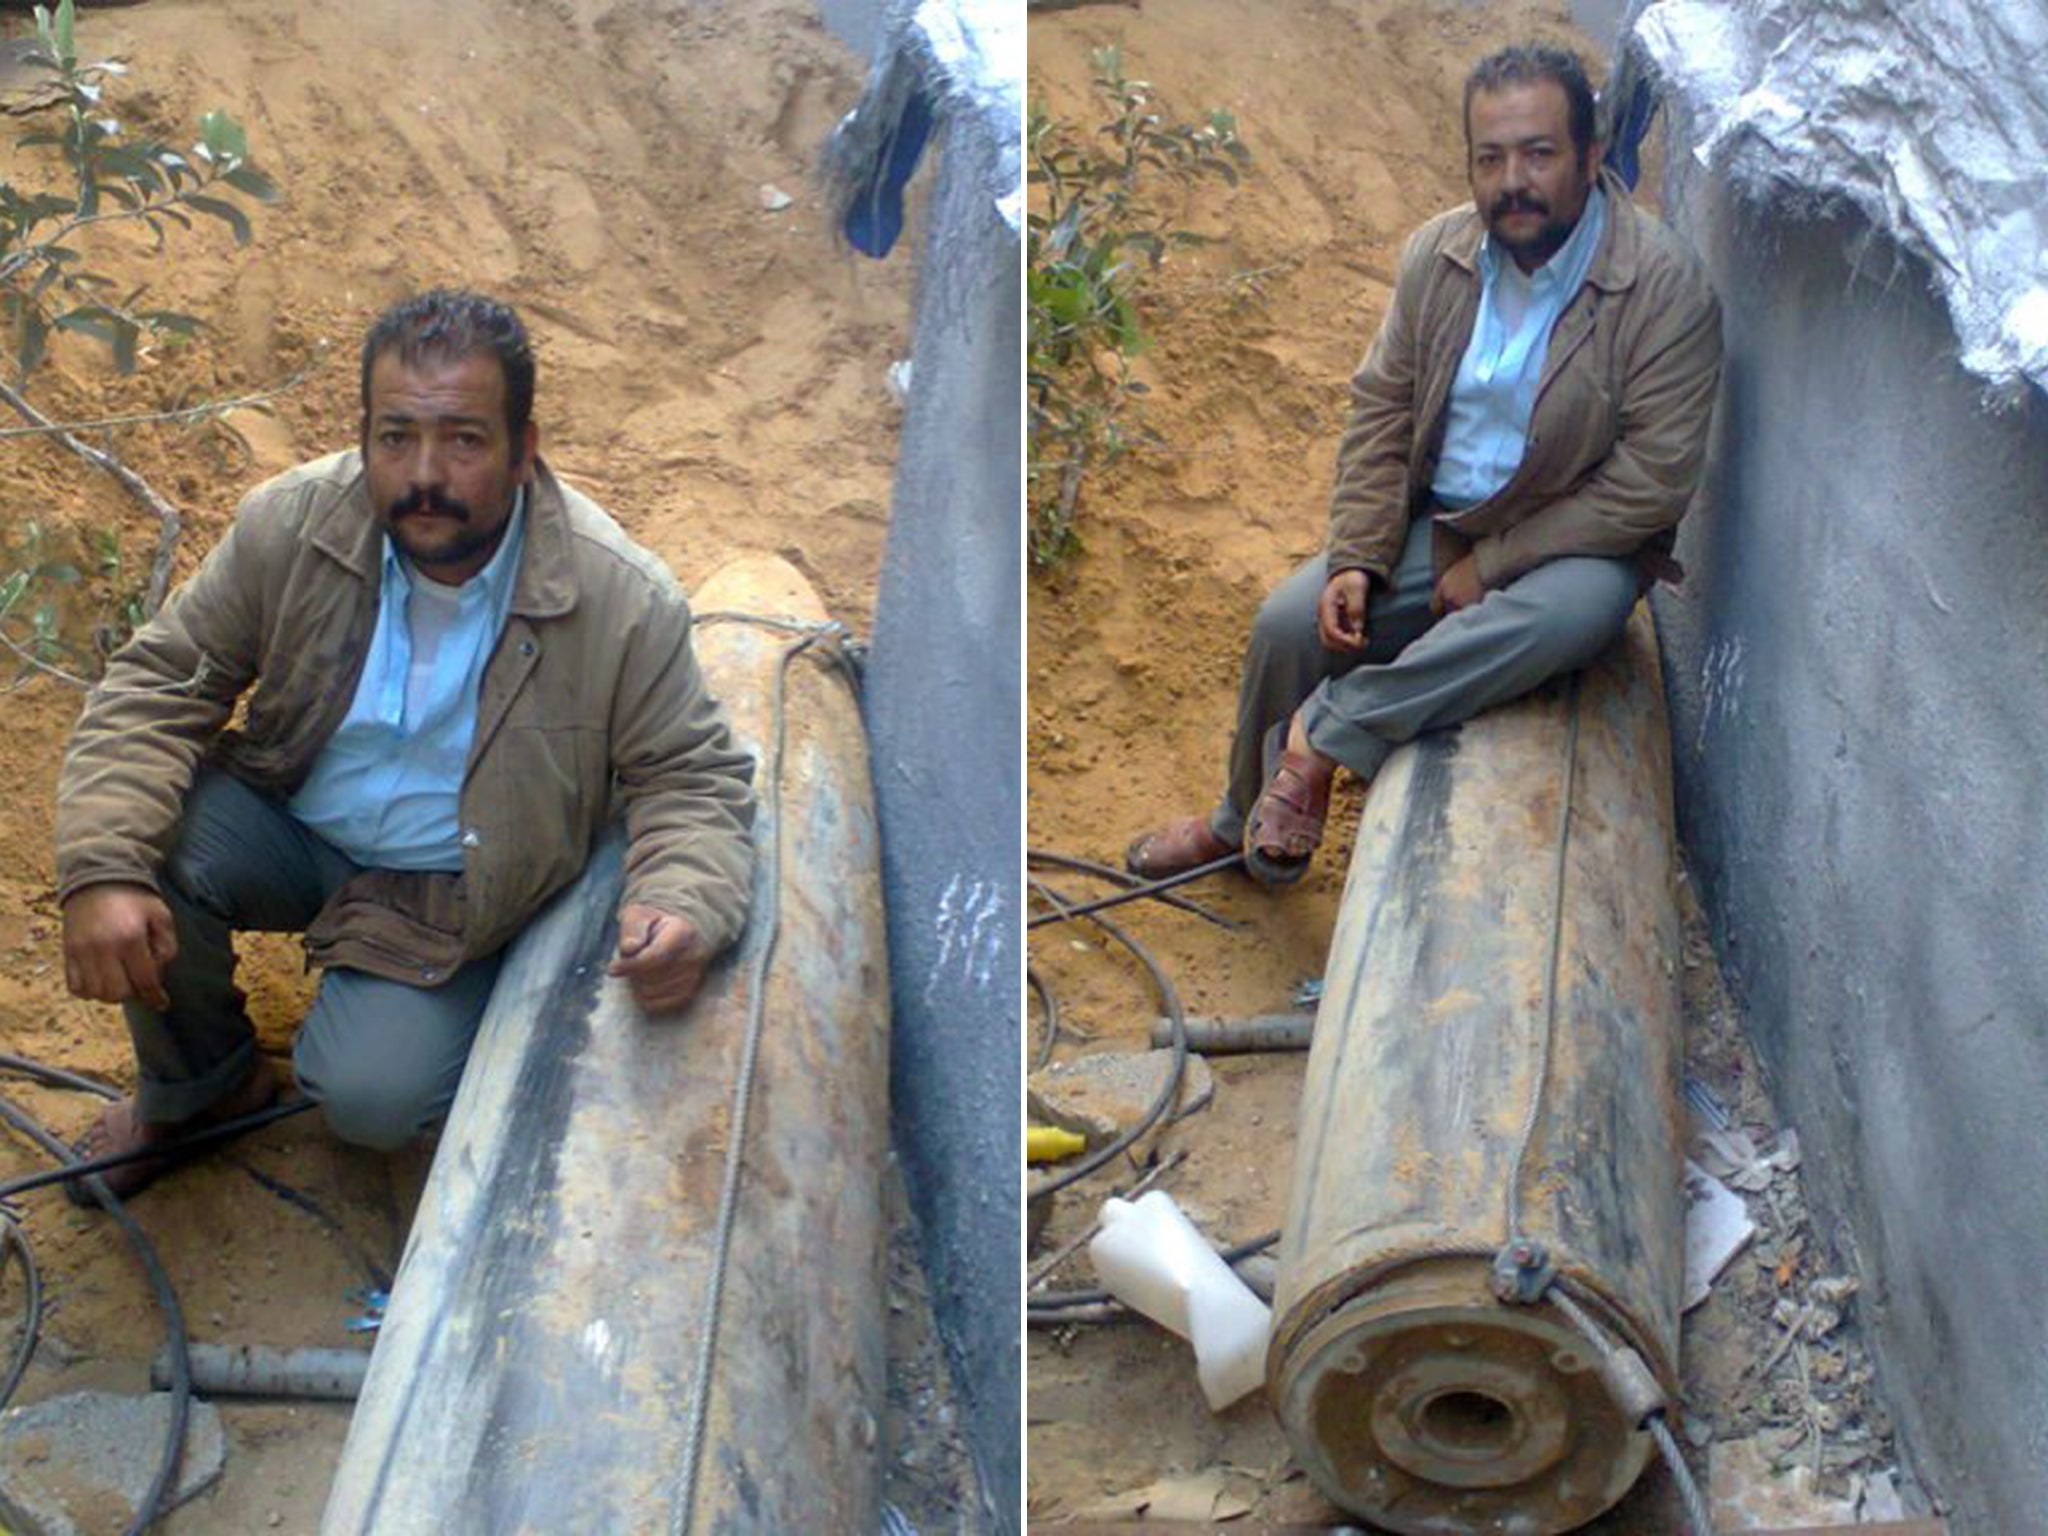 Fadel Nassir and his family were living with the unexploded bomb for seven months